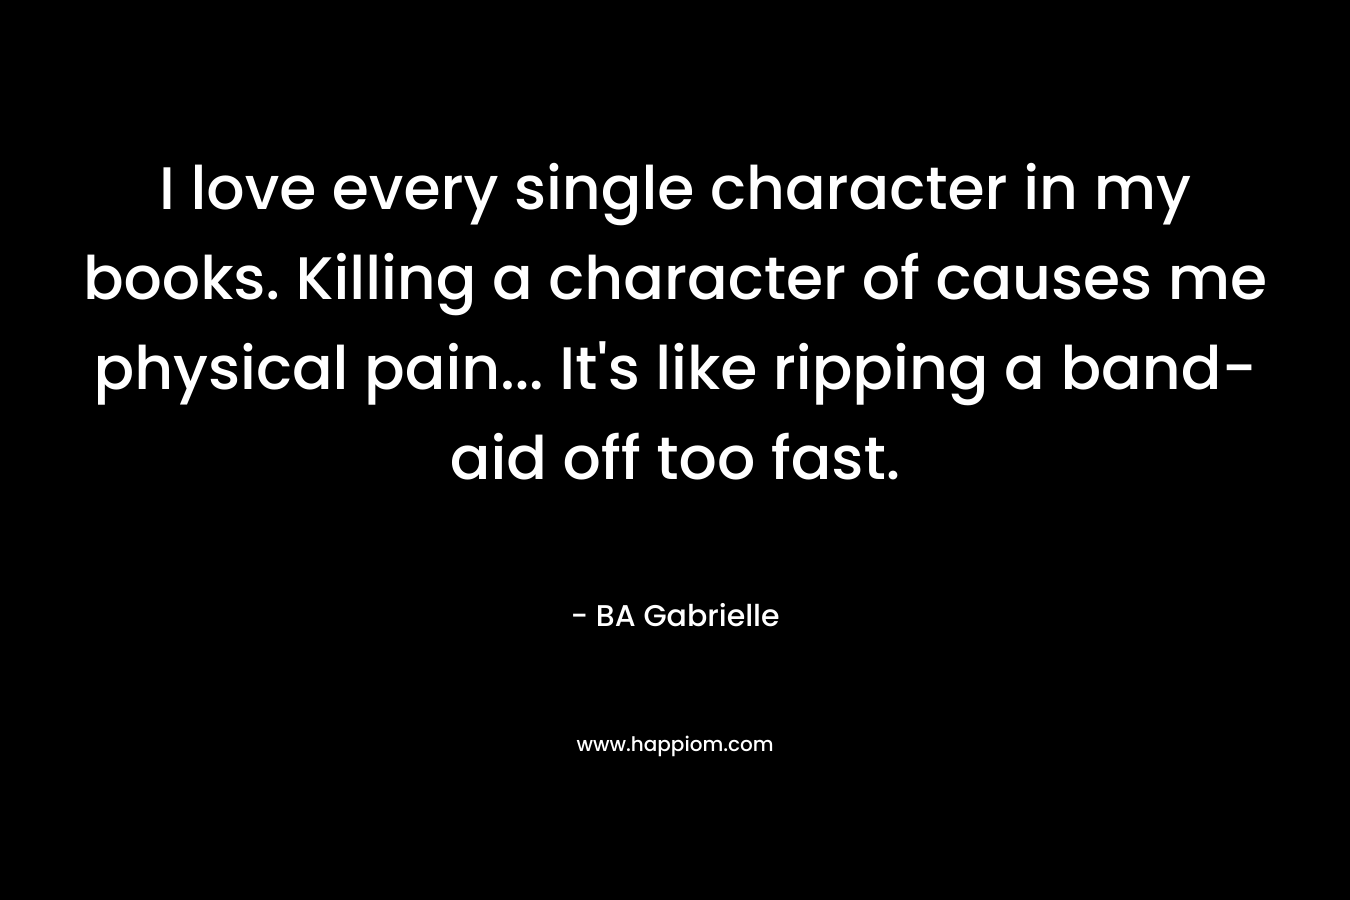 I love every single character in my books. Killing a character of causes me physical pain… It’s like ripping a band-aid off too fast. – BA Gabrielle